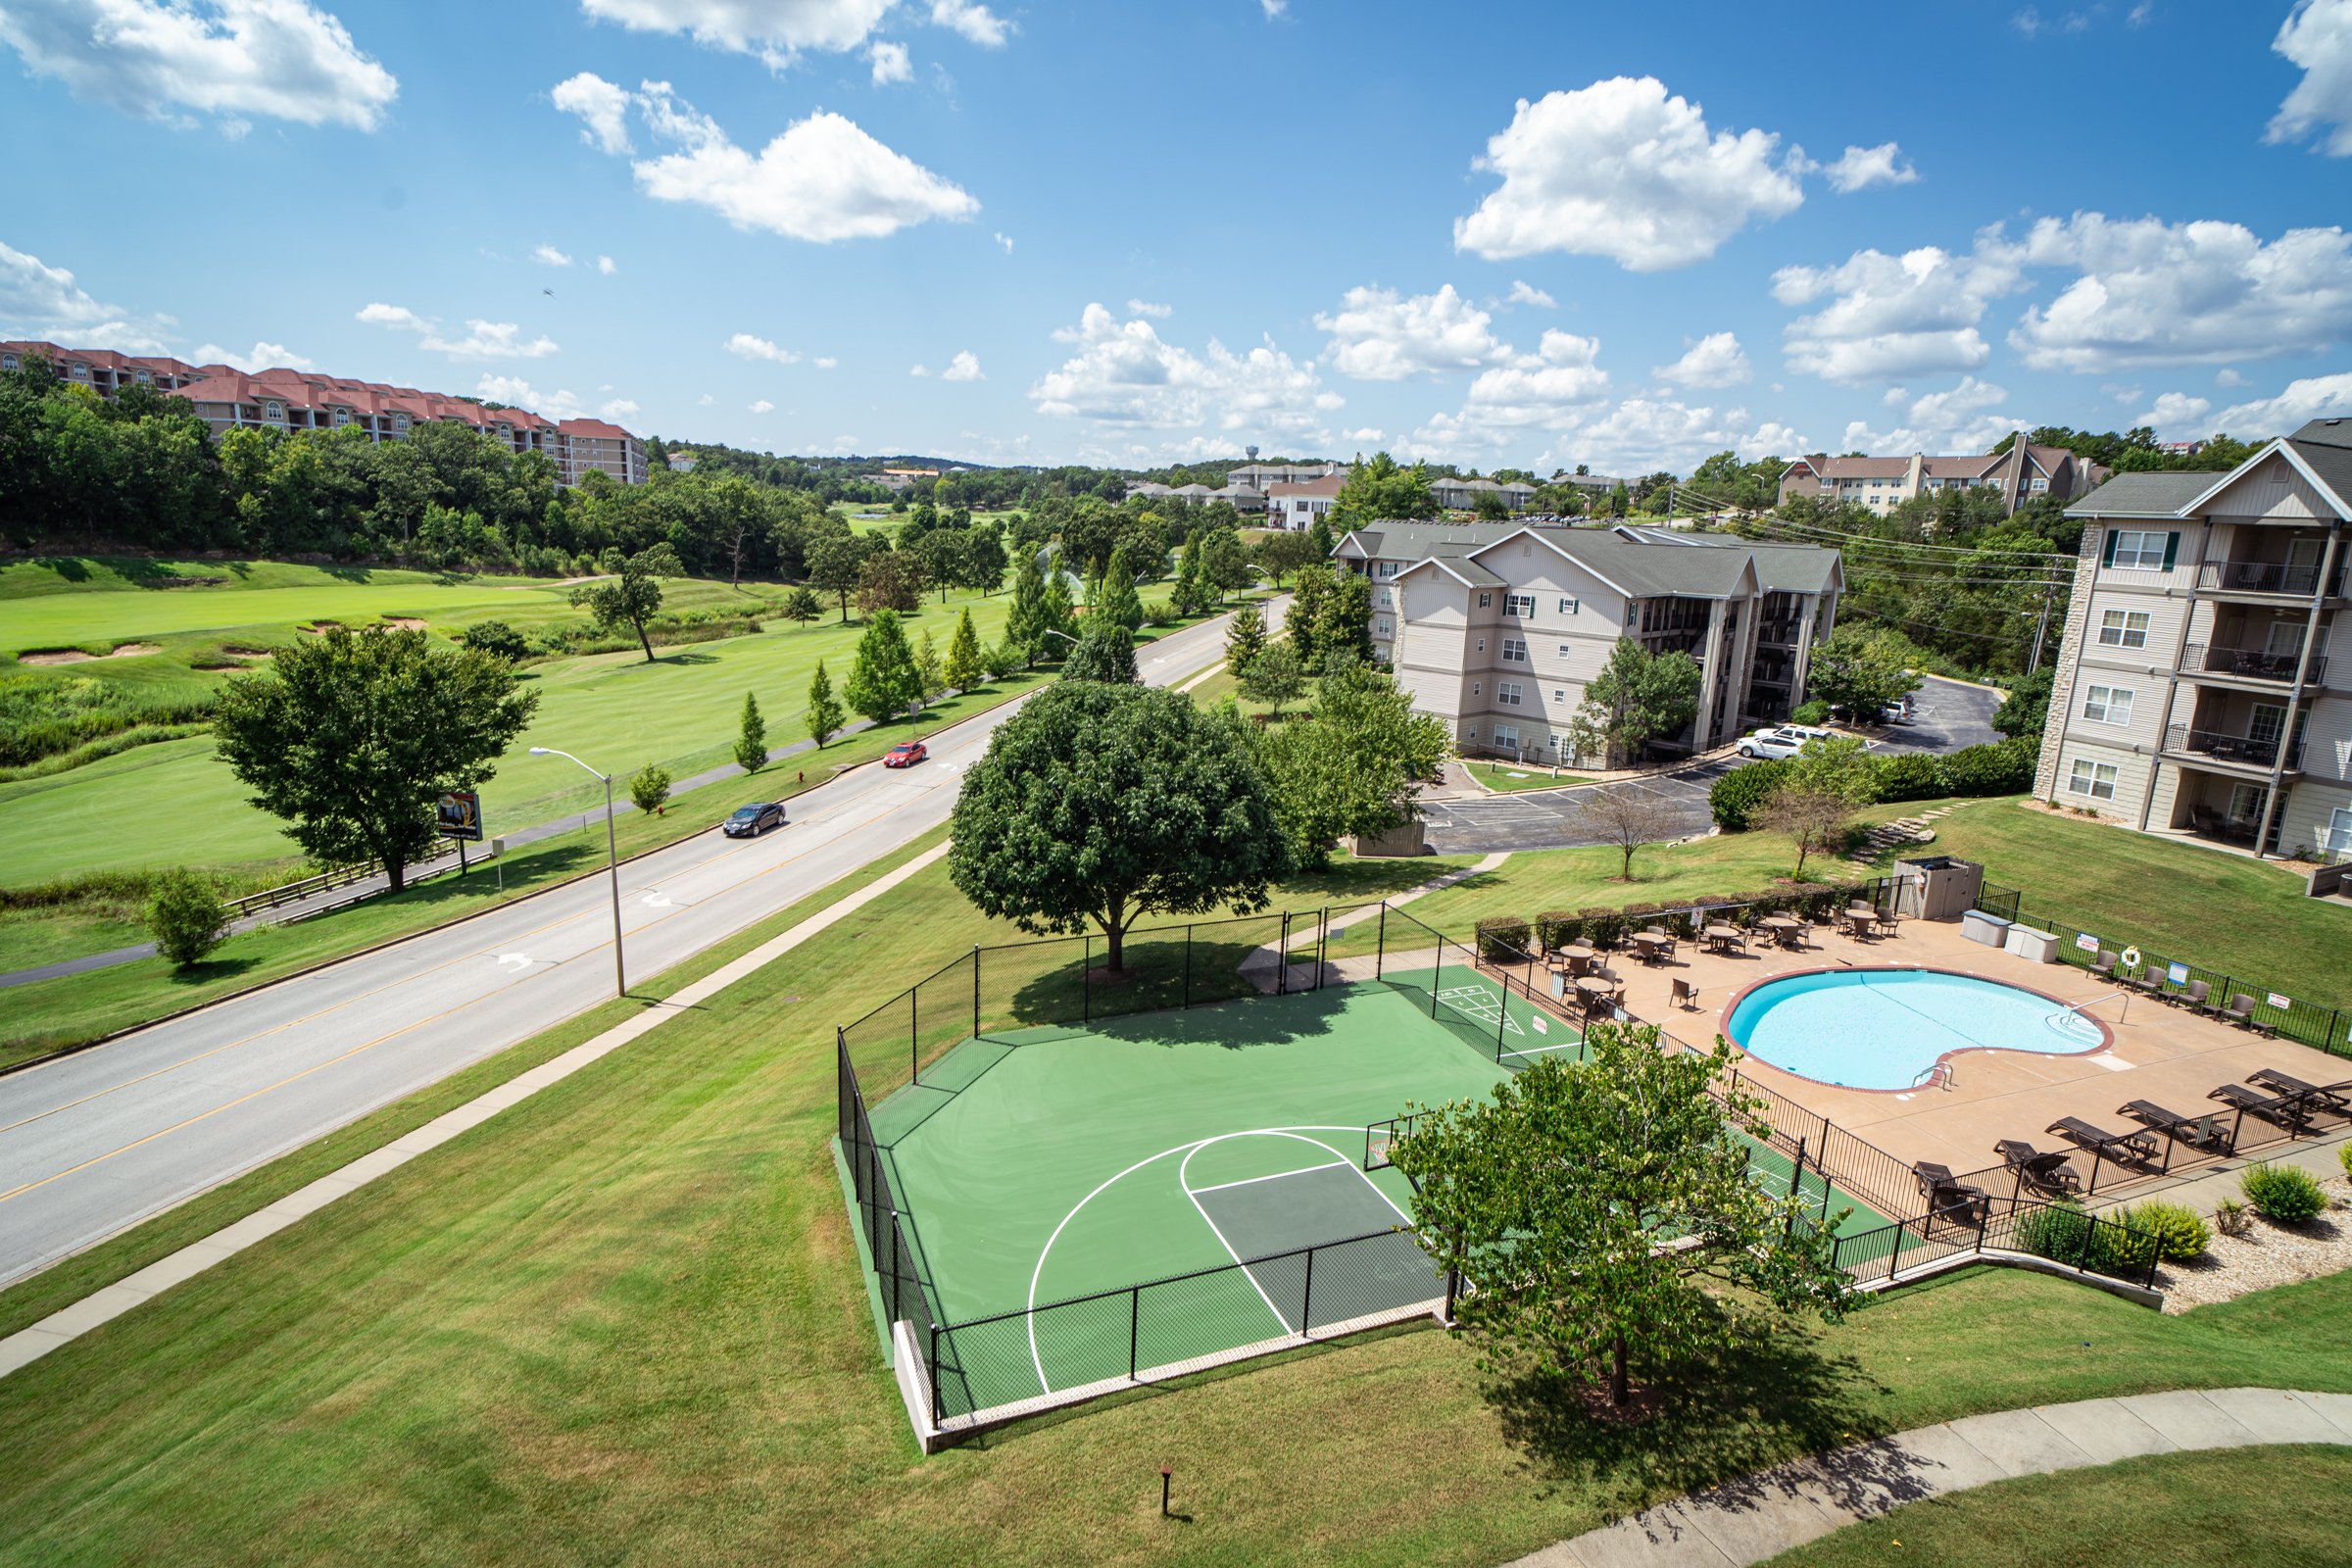 Basket Ball Court and Seasonal Outdoor Pool Access